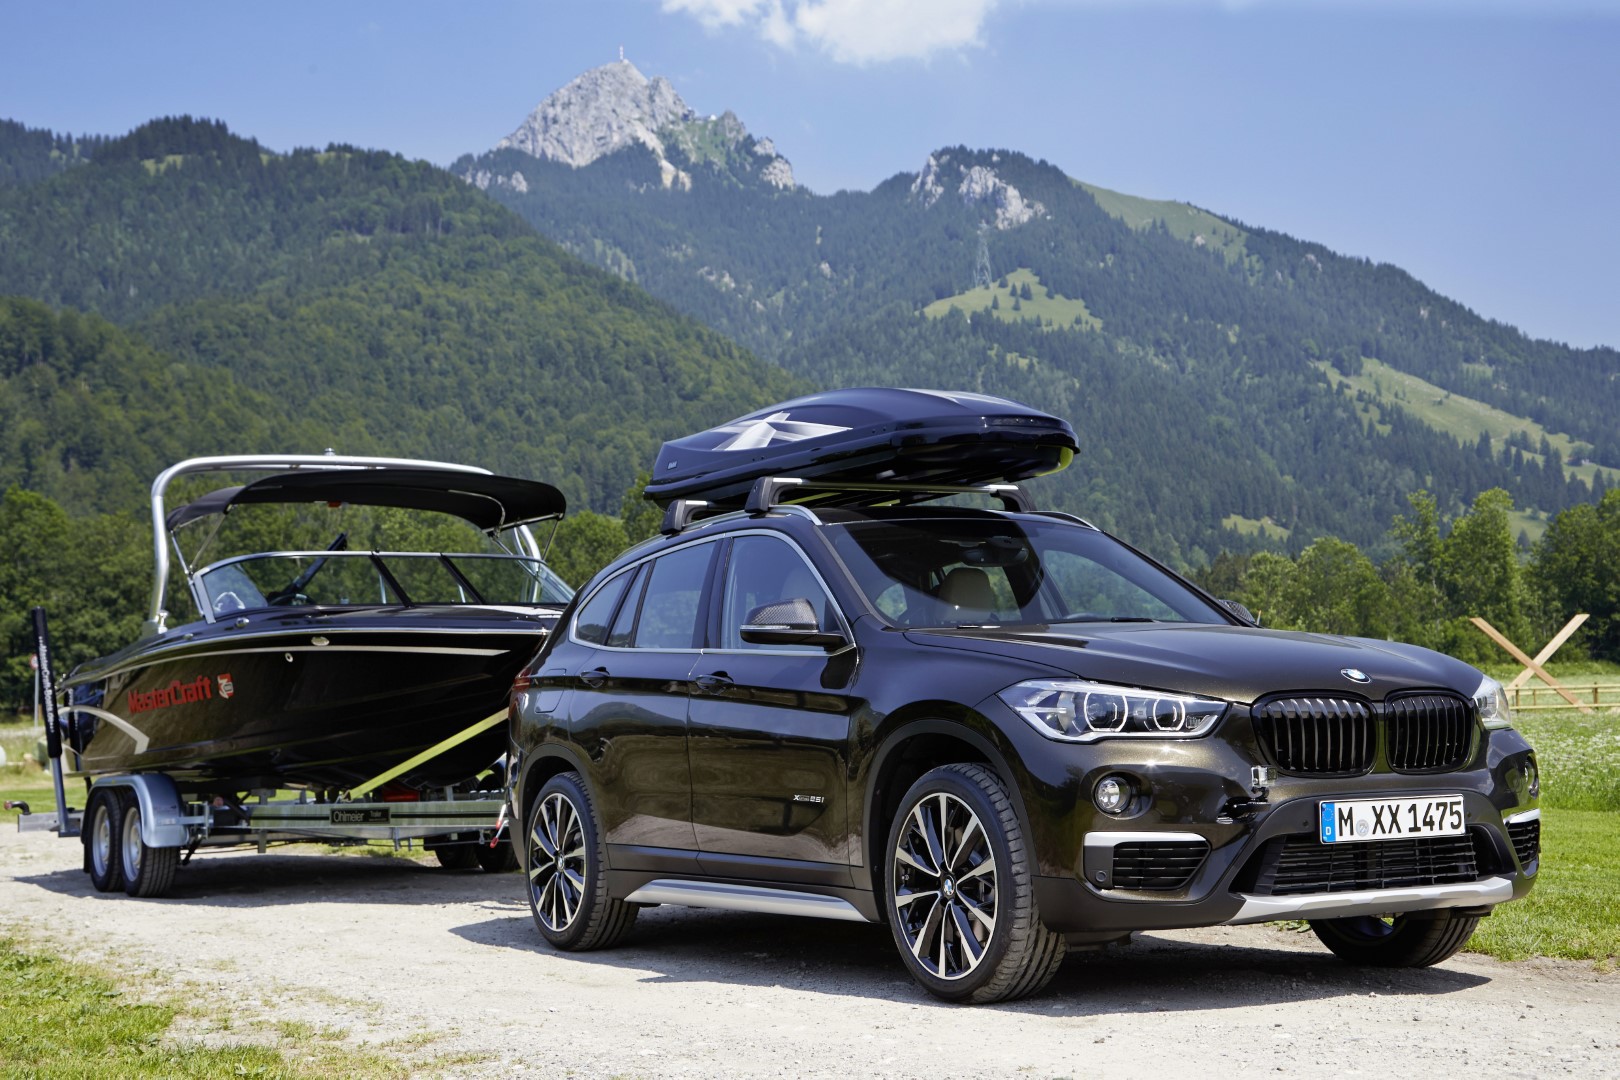 1554707772P90190951-highRes-the-new-bmw-x1-on-lo.jpg